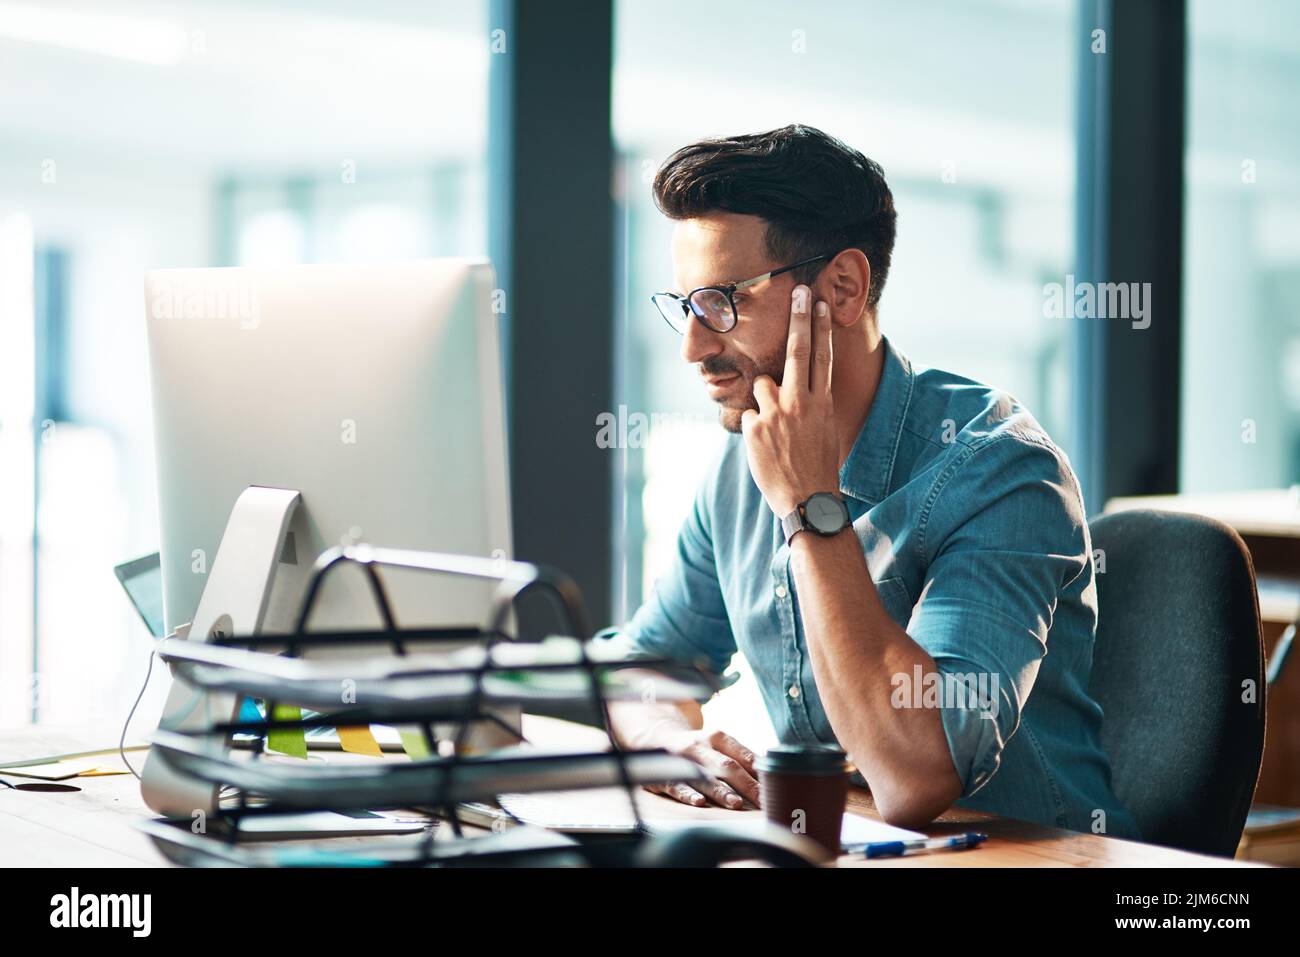 Professional corporate business man working on computer, browsing the internet and completing a project while sitting at a desk alone at work. One Stock Photo